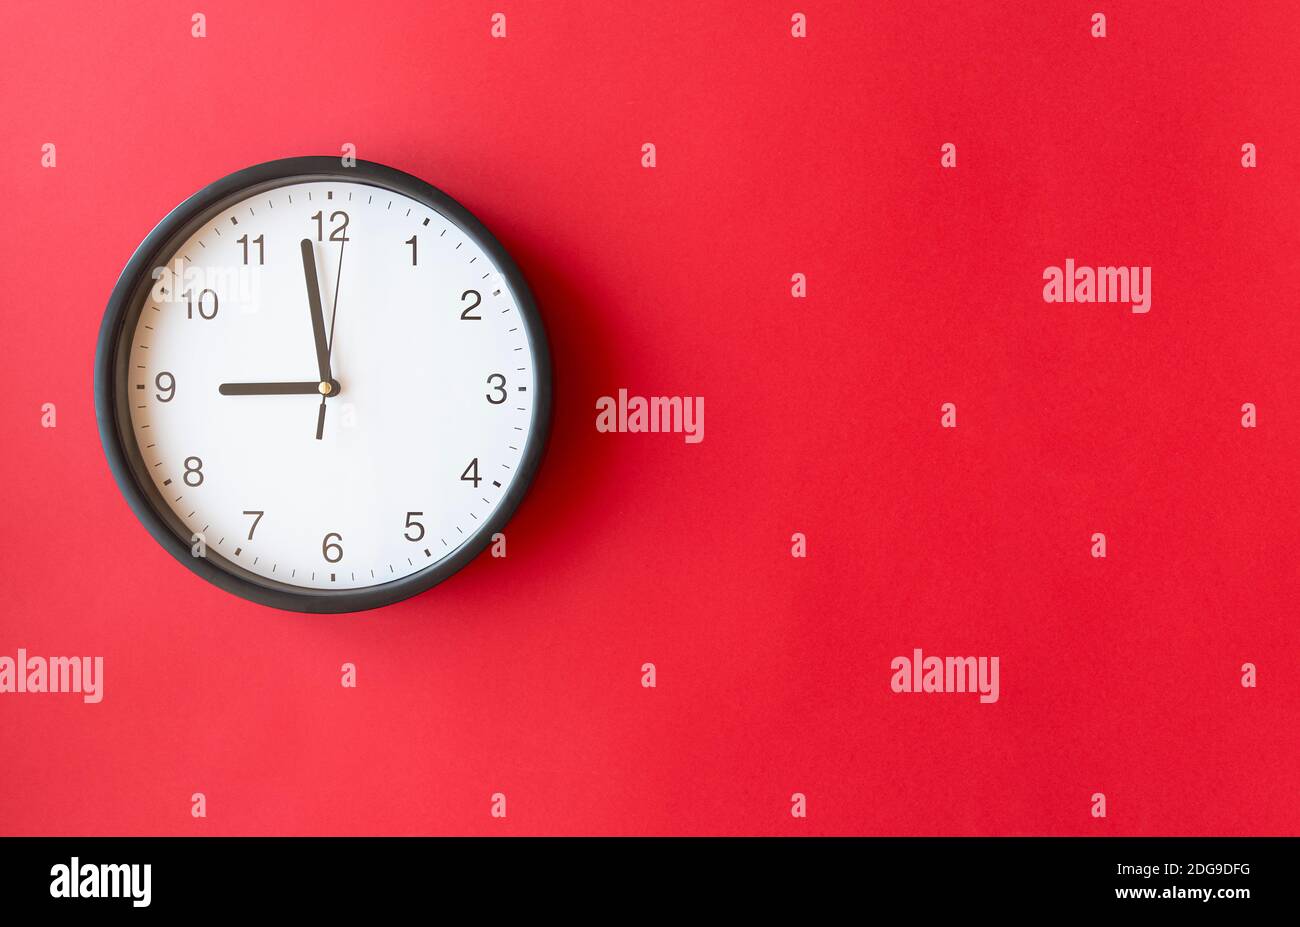 Round wall clock on red surface showing 9 o’clock, layout, top view, place for text Stock Photo